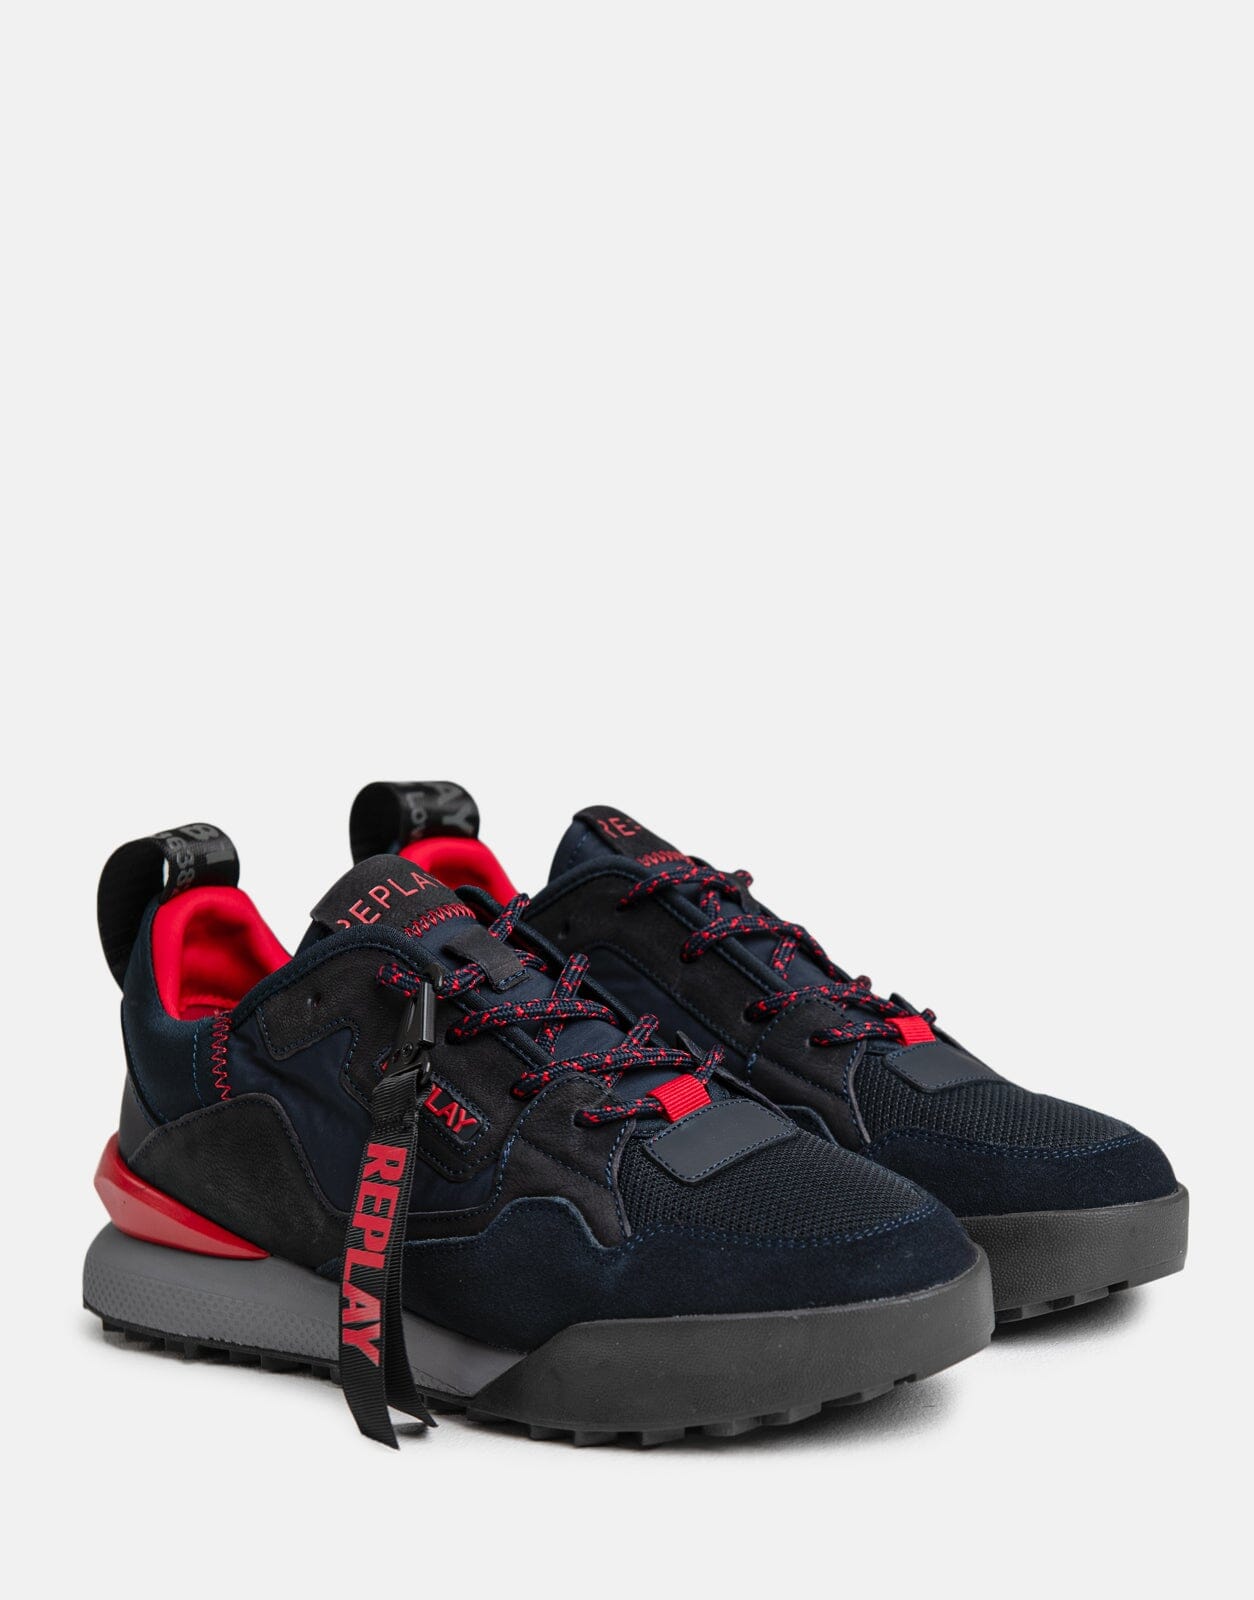 Replay Field Master Navy Red Sneakers - Subwear